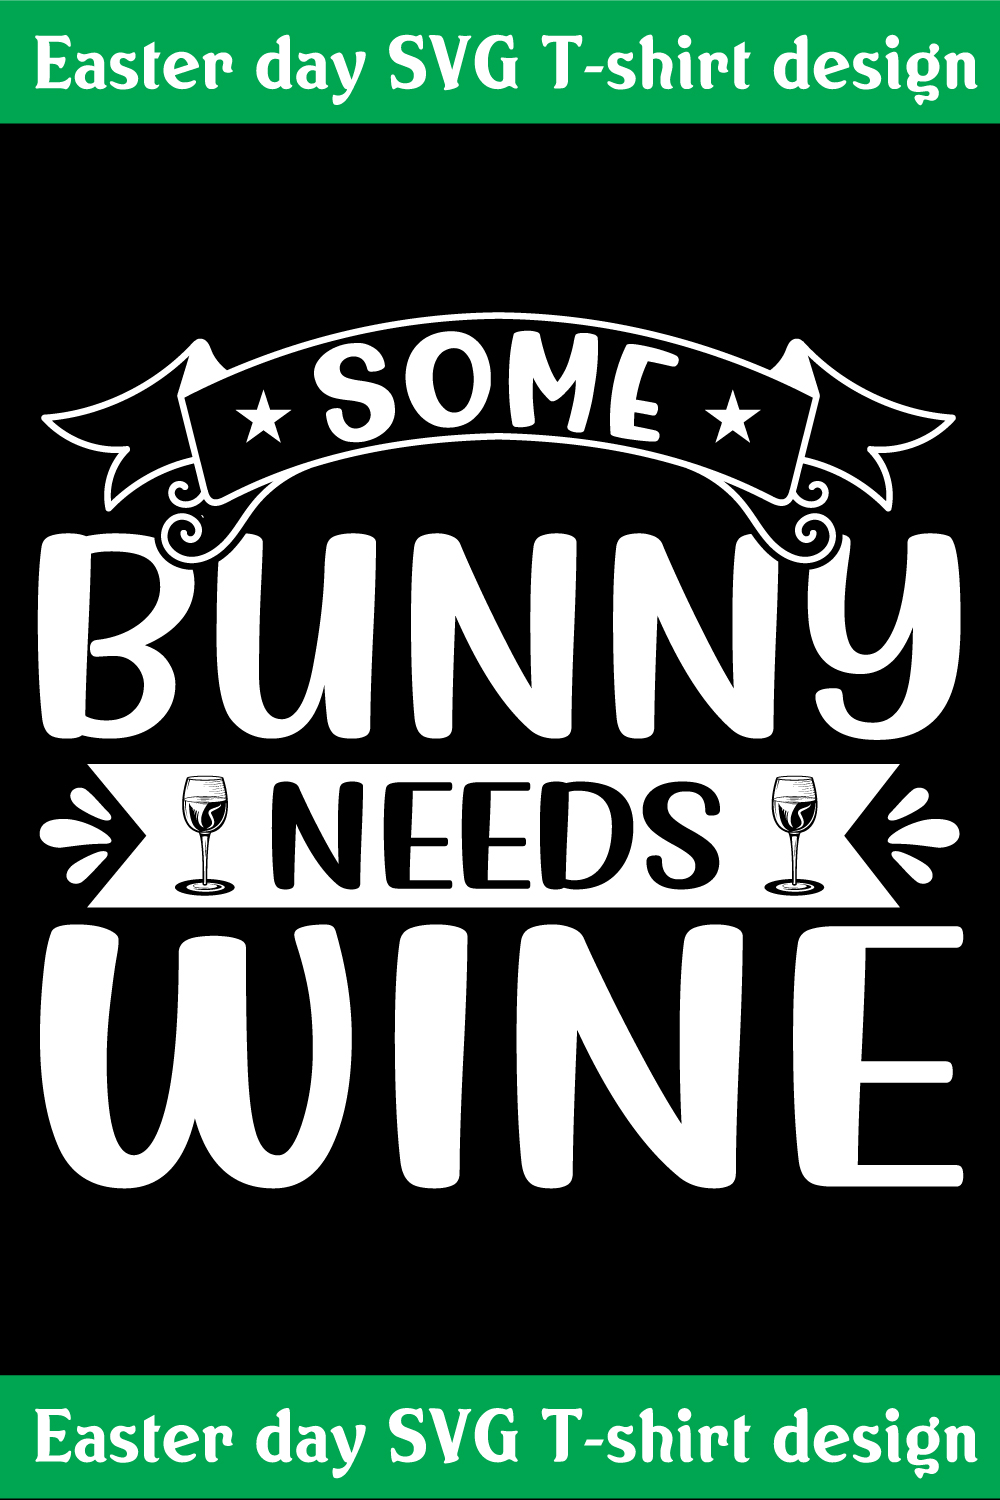 Some bunny needs wine SVG T-shirt design pinterest preview image.